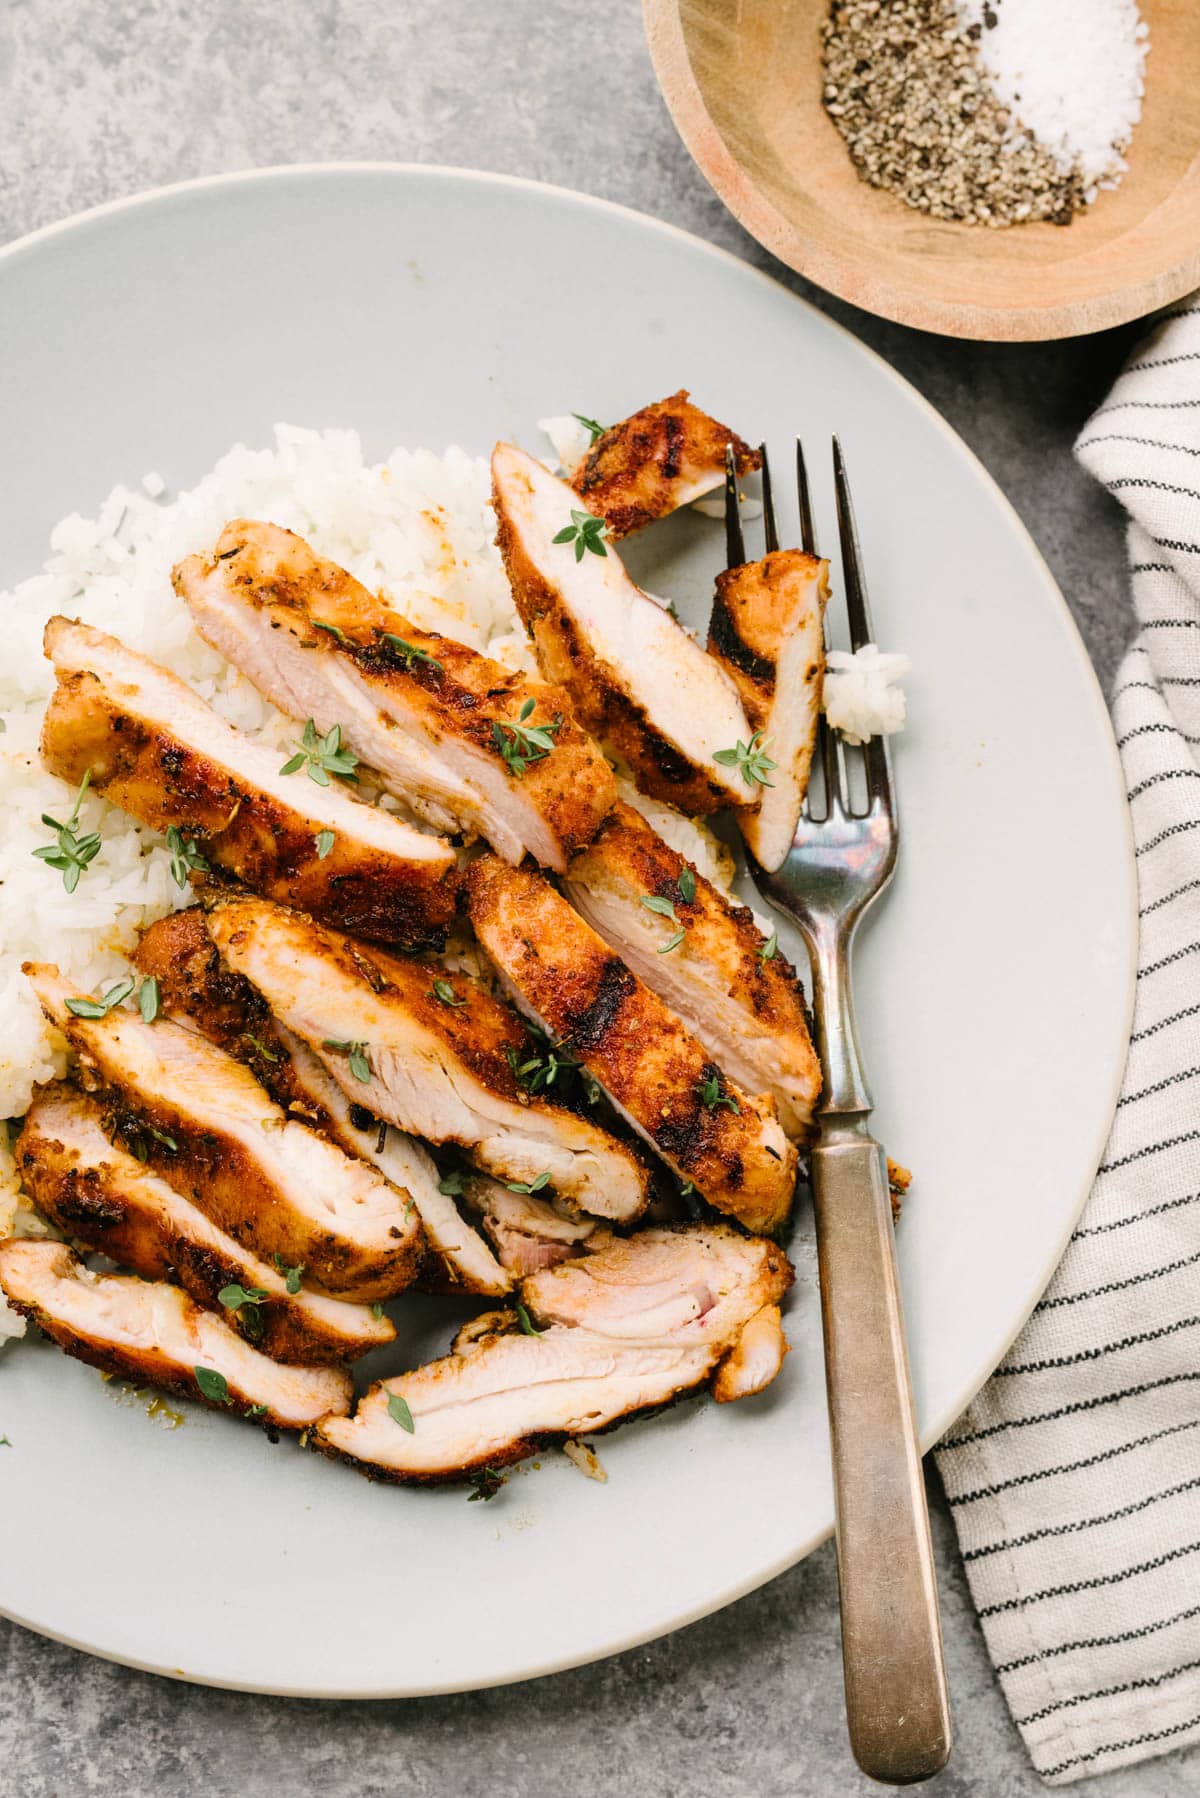 A fork tucked under sliced grilled chicken thighs over steamed white rice on a blue plate; a striped linen napkin and small bowl with salt and pepper are to the side.